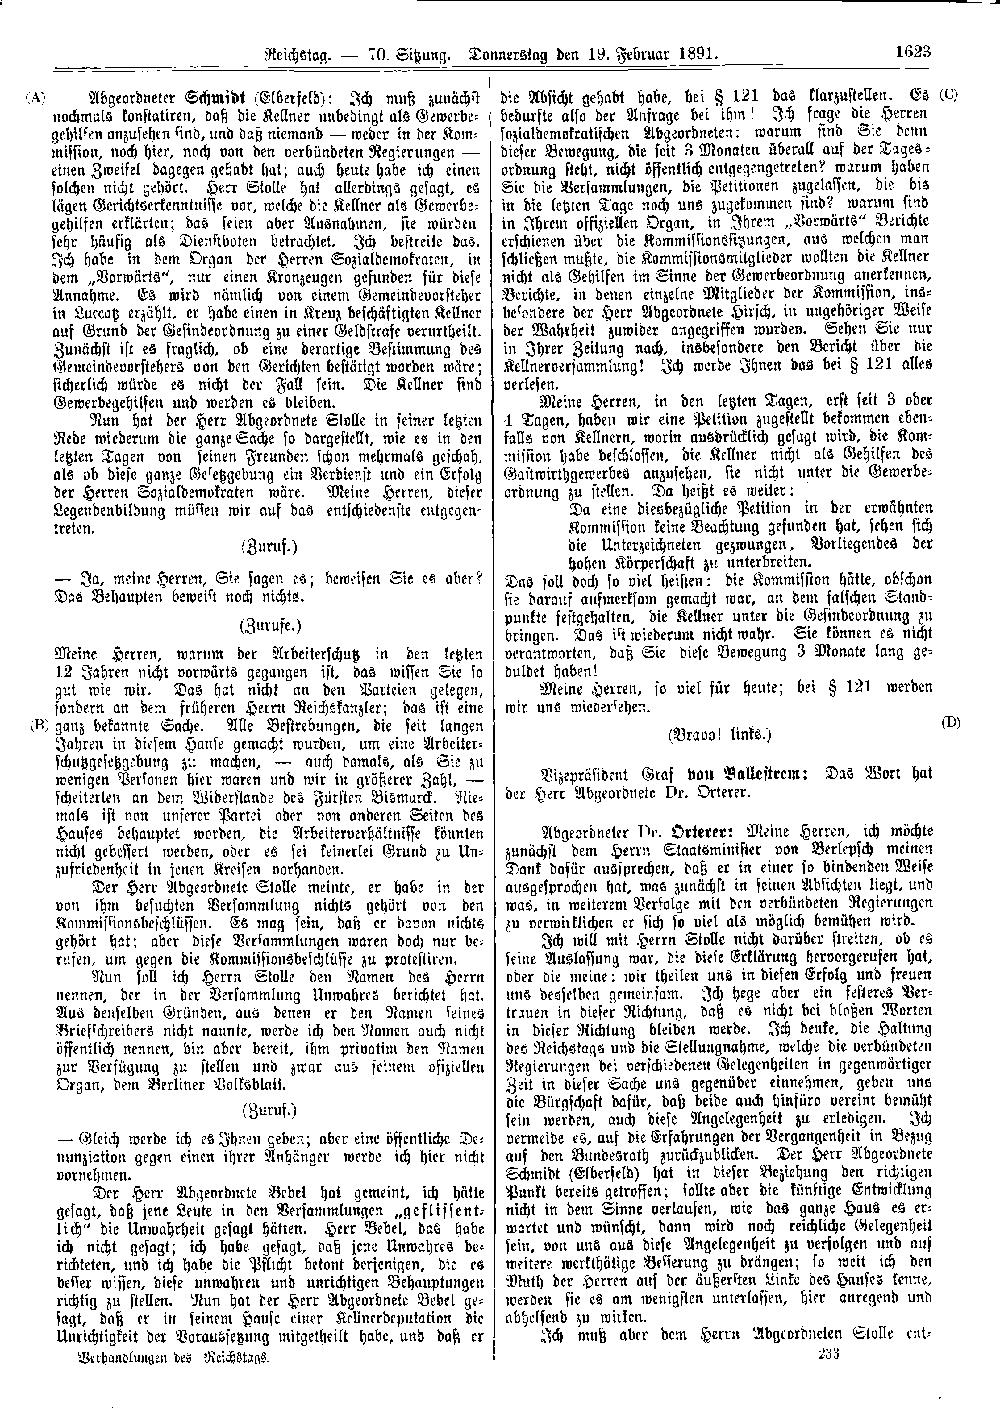 Scan of page 1623